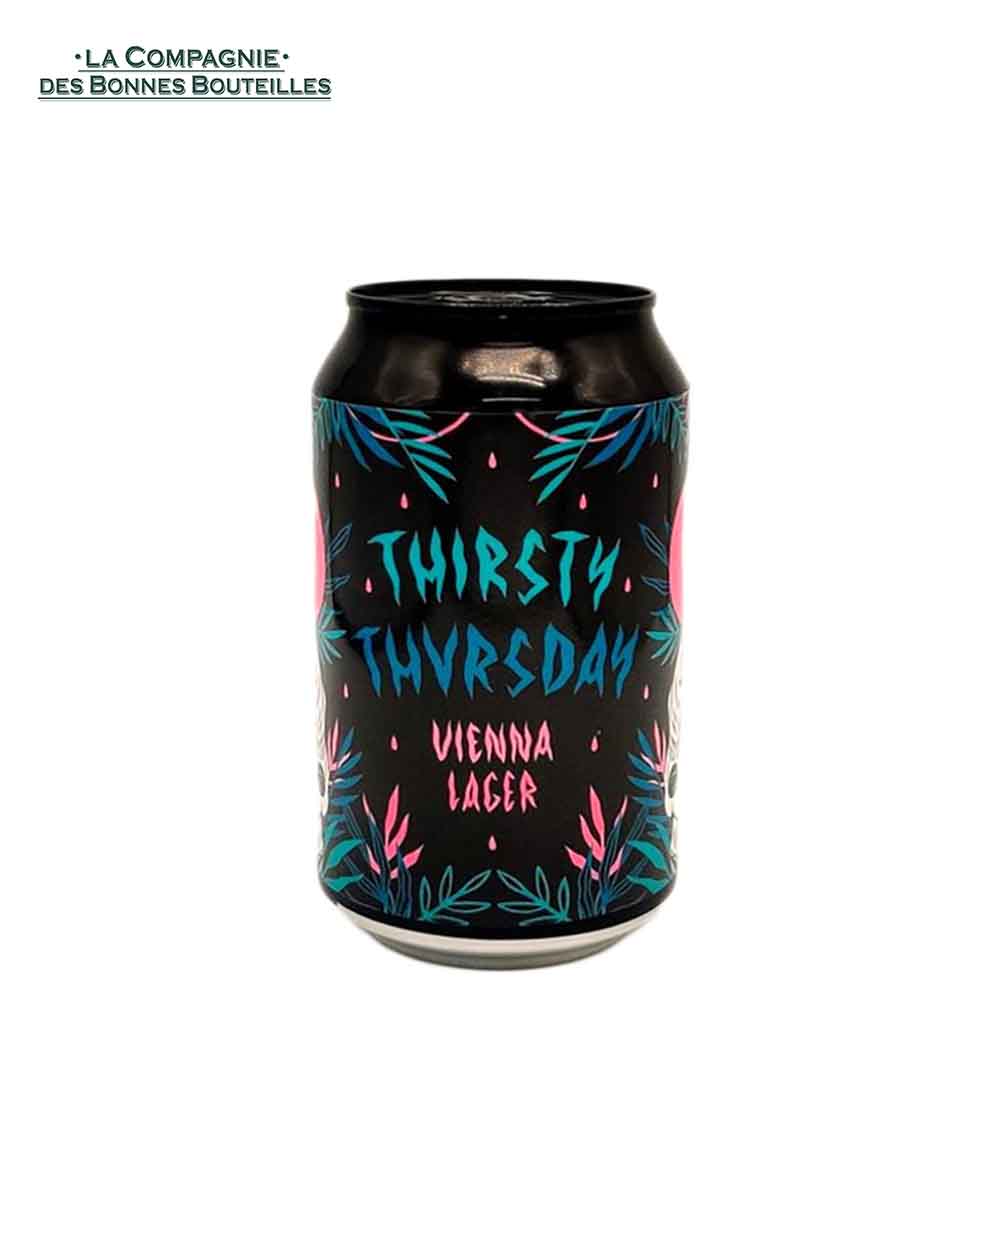 Bière IceBreaker Thirsty Thursday - Vienna lager  - 33 cl Can